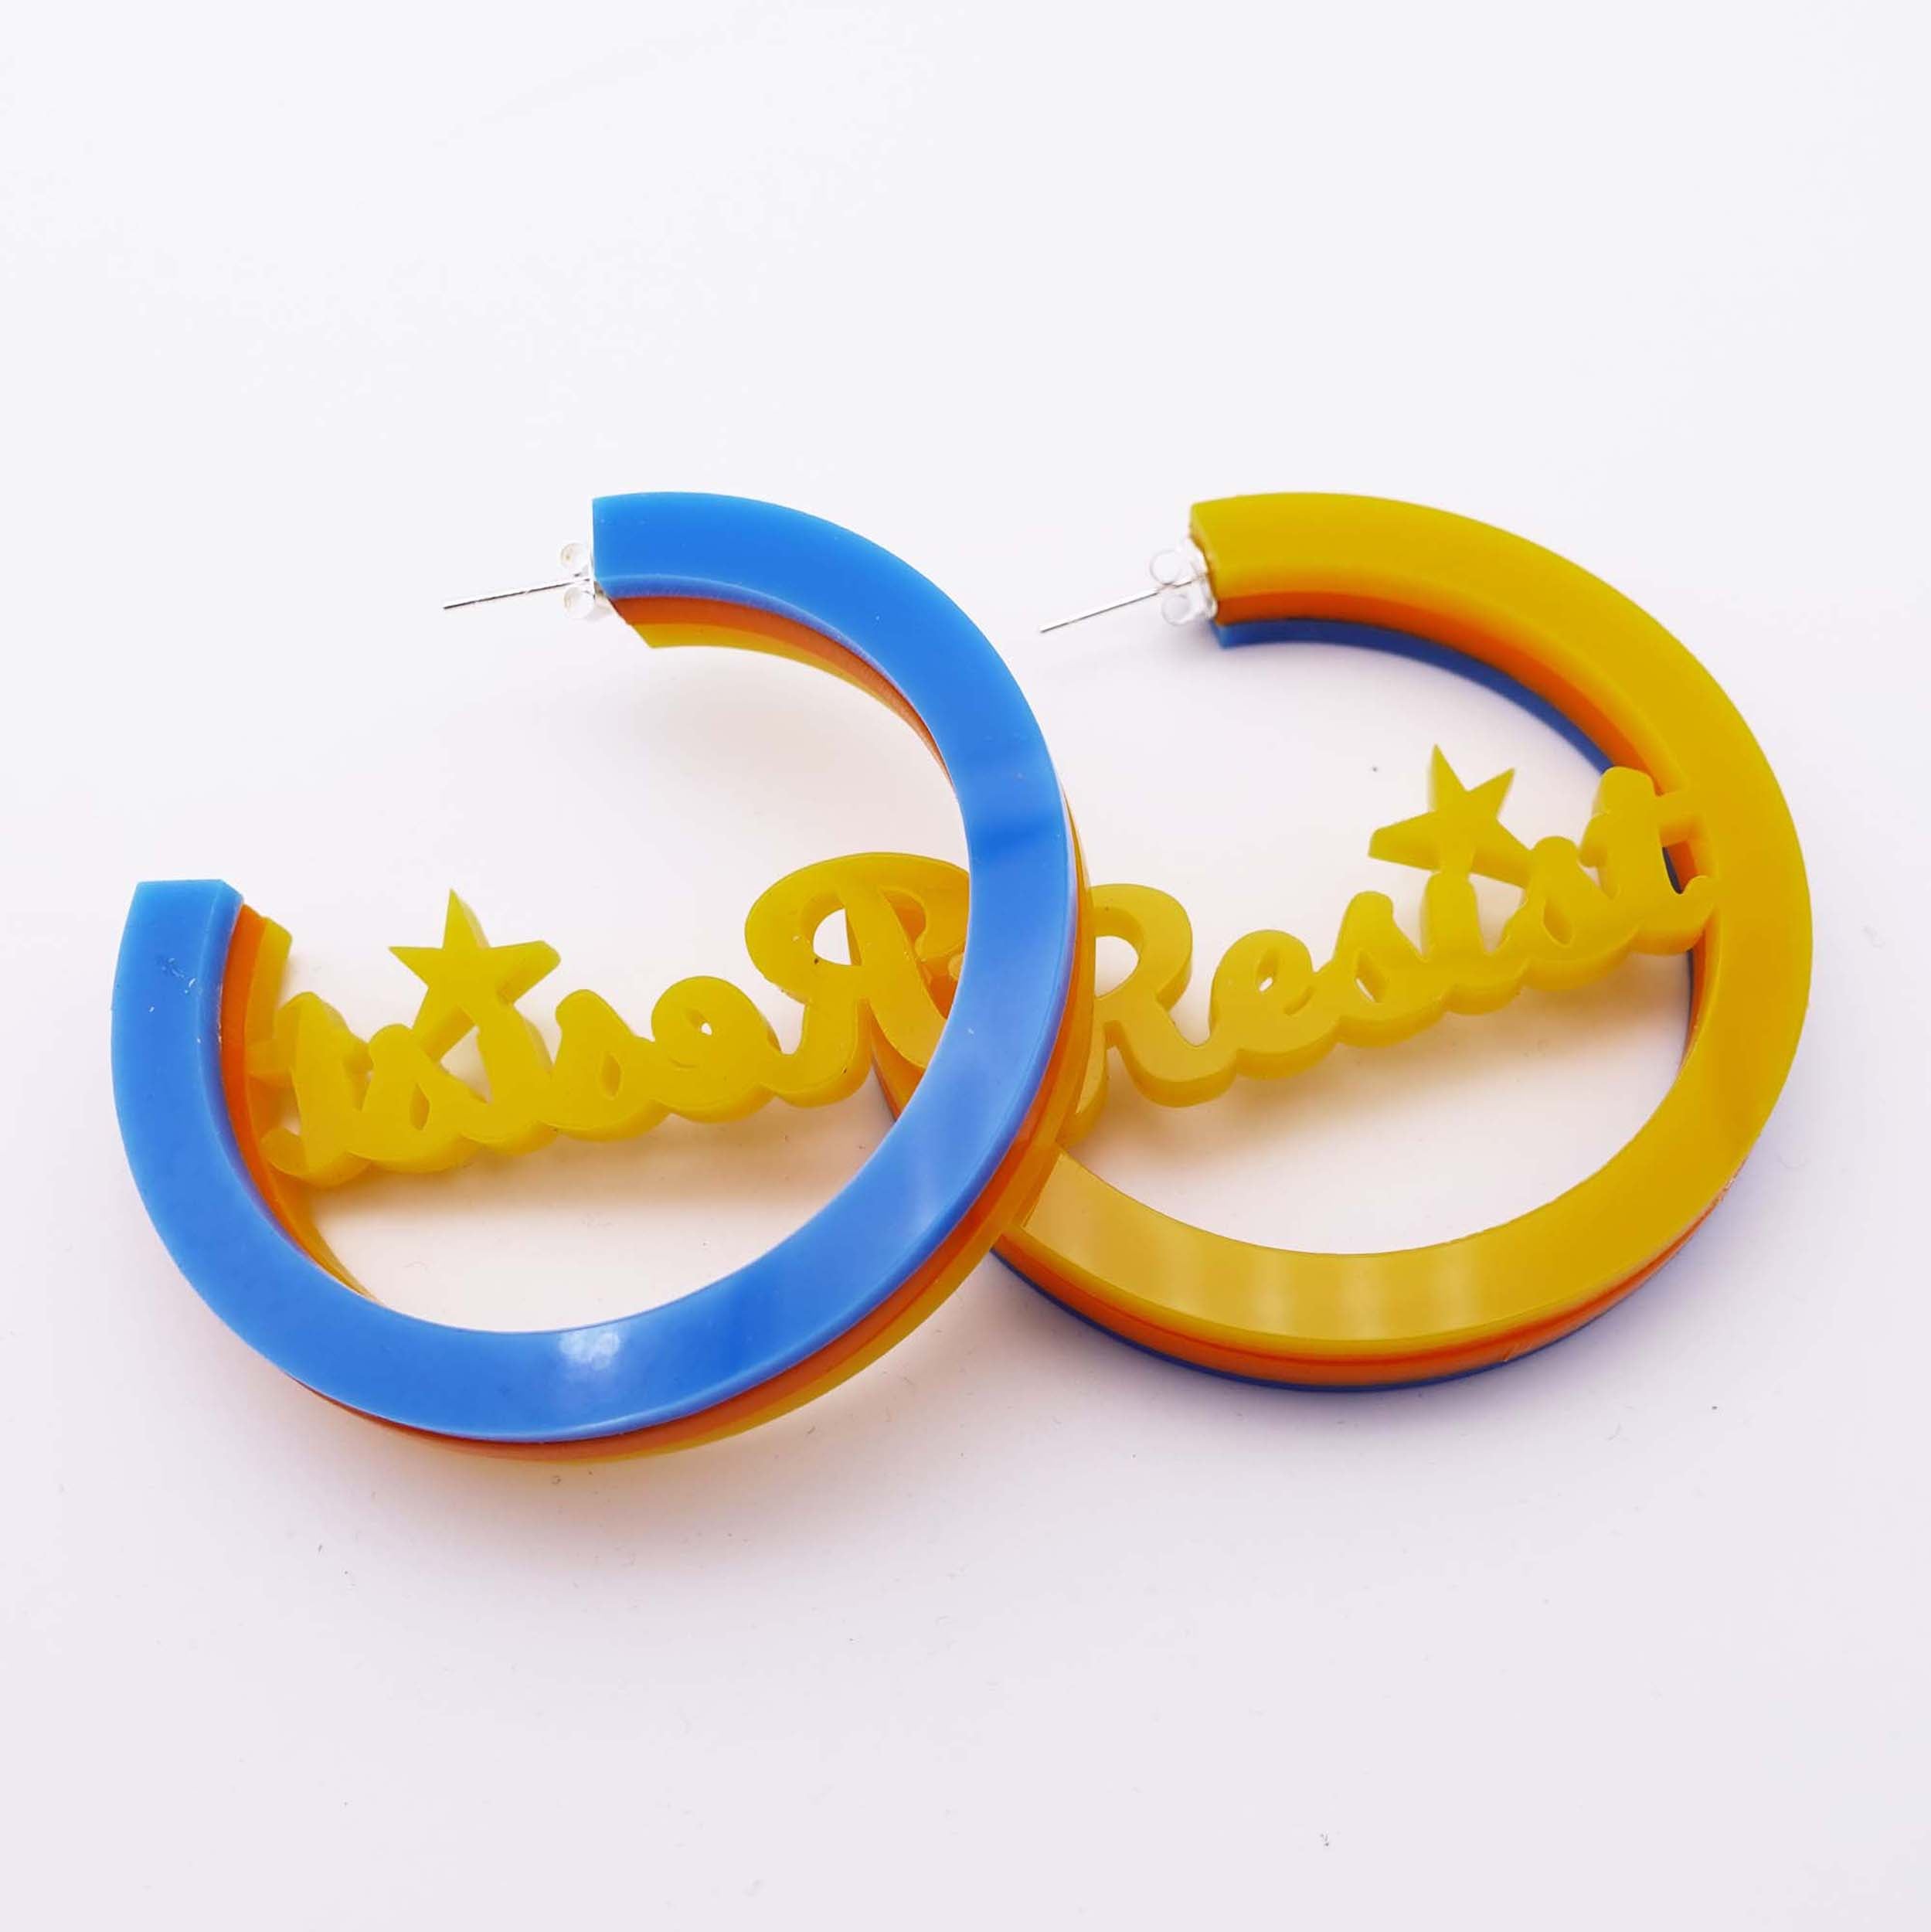 Resist and Persist statement hoop earrings in Roller Disco colourway: sunflower yellow, orange and blue. 